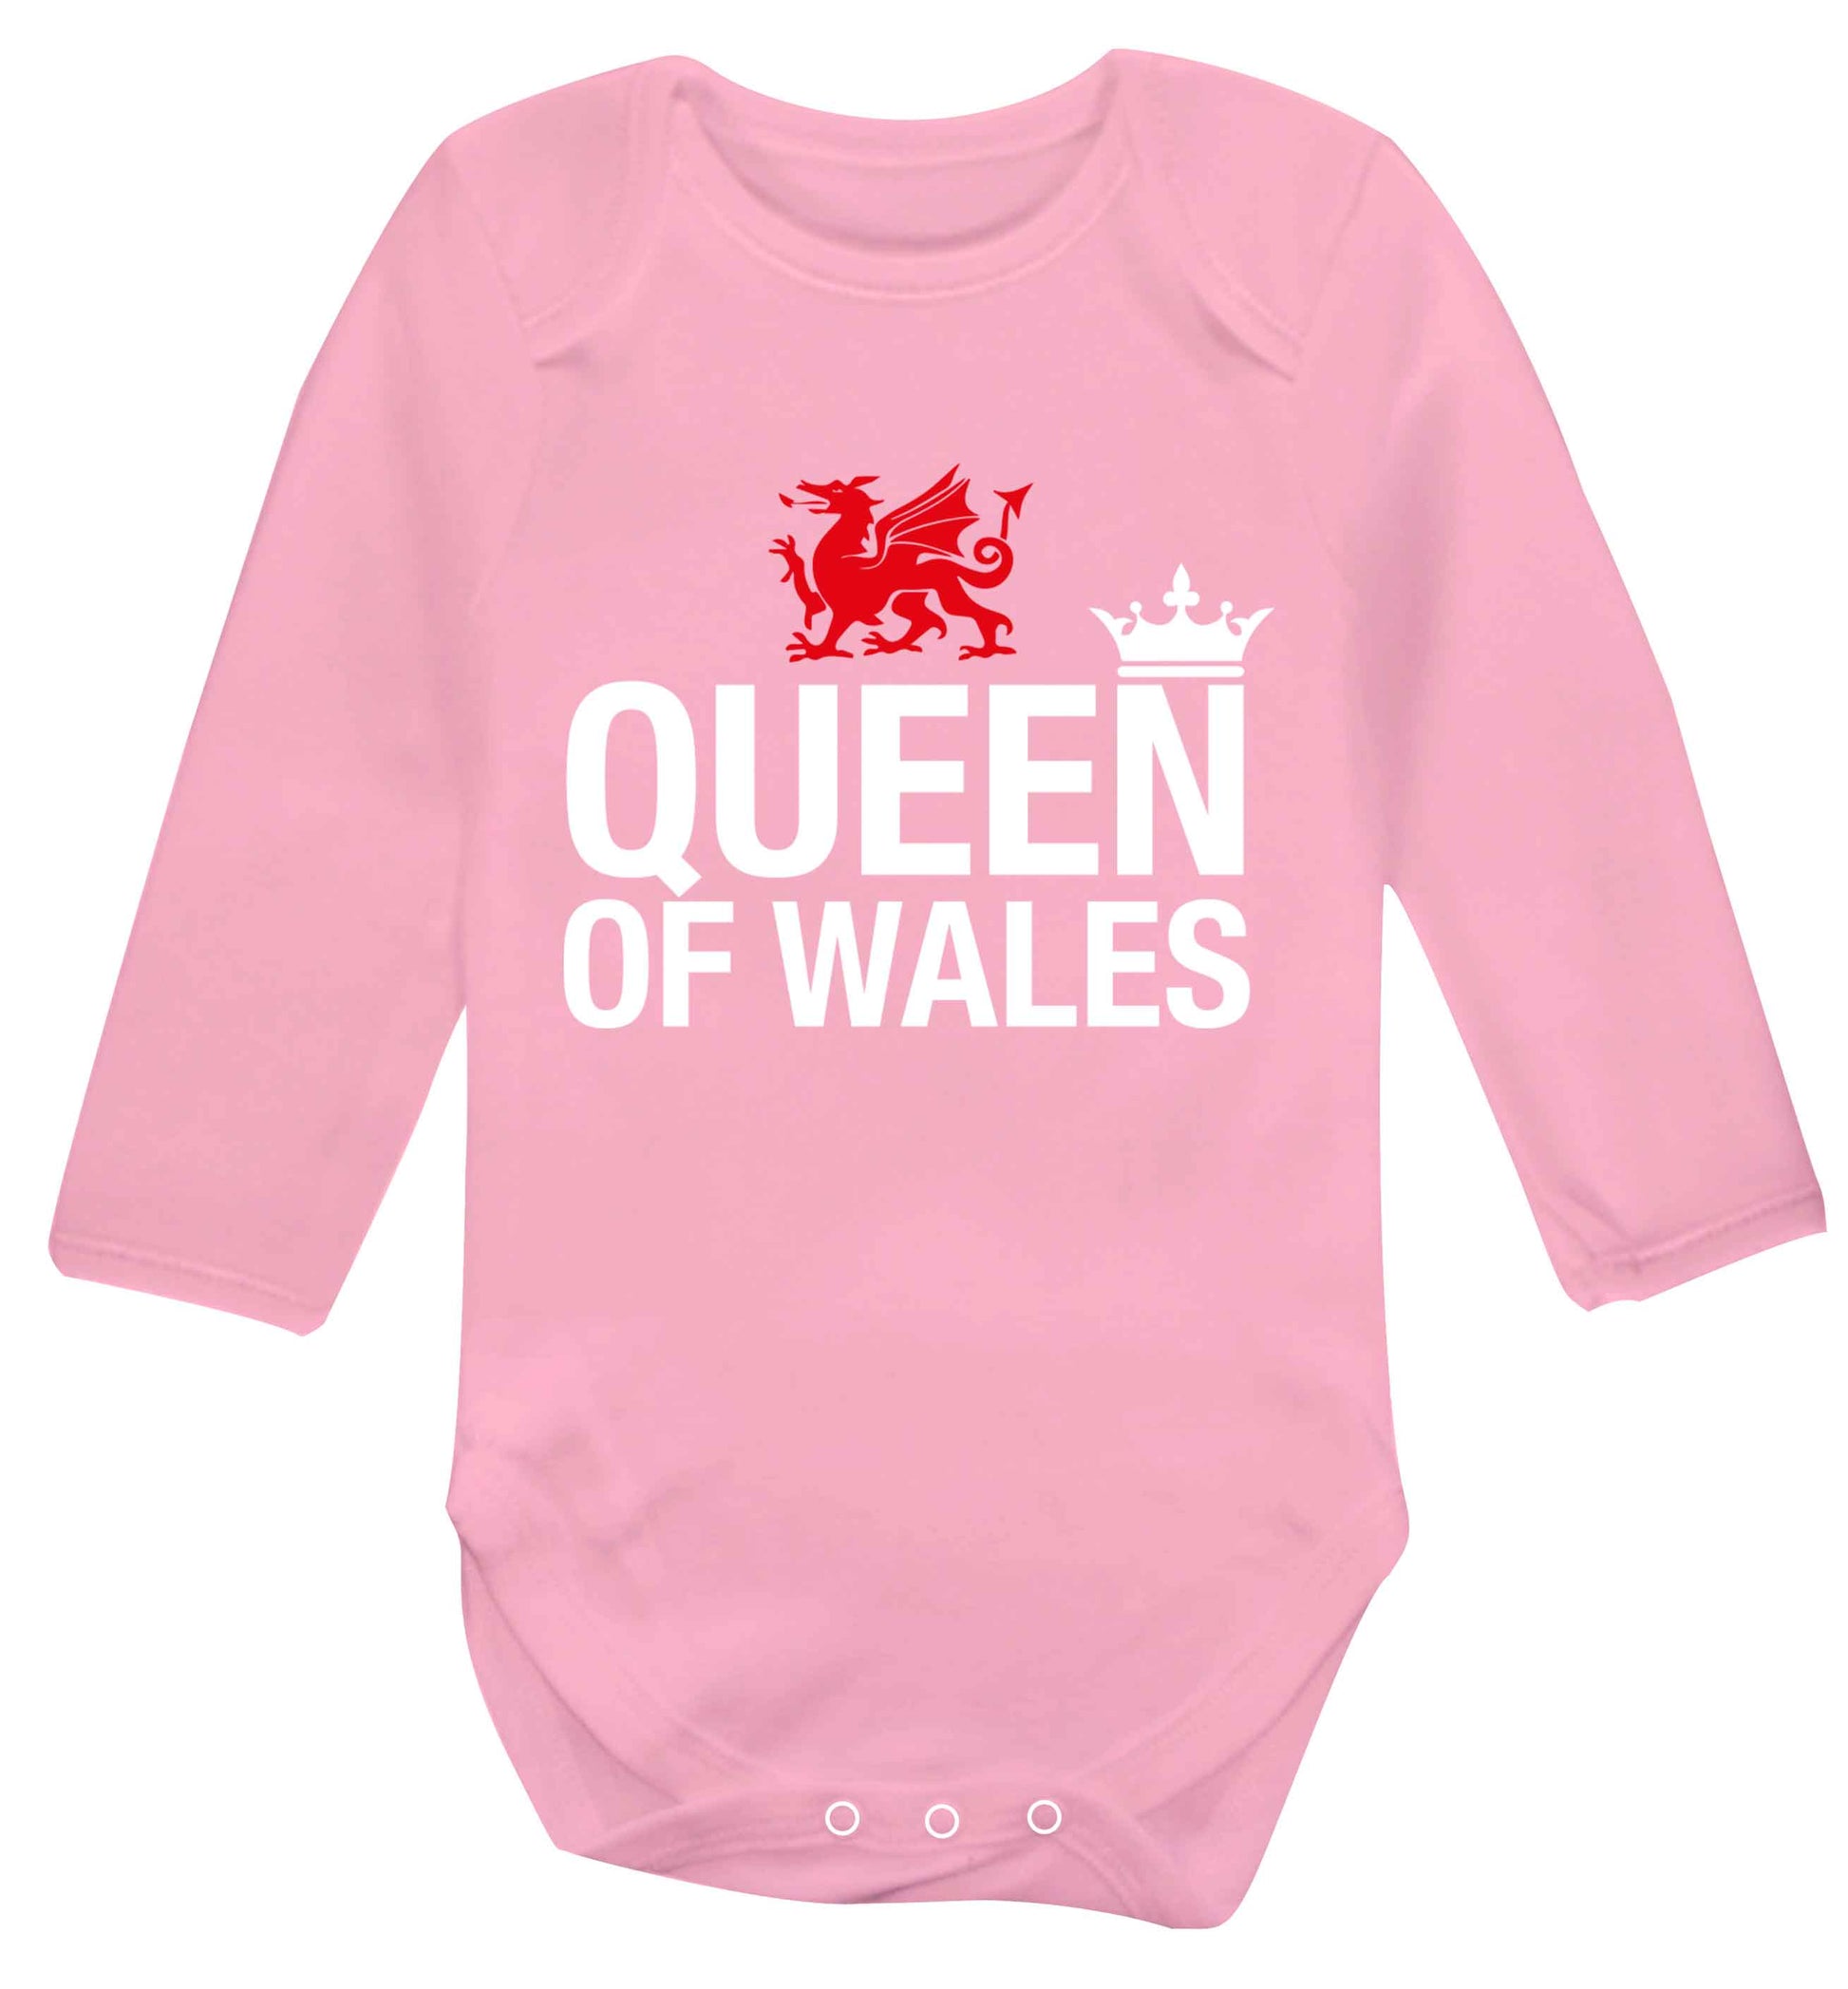 Queen of Wales Baby Vest long sleeved pale pink 6-12 months